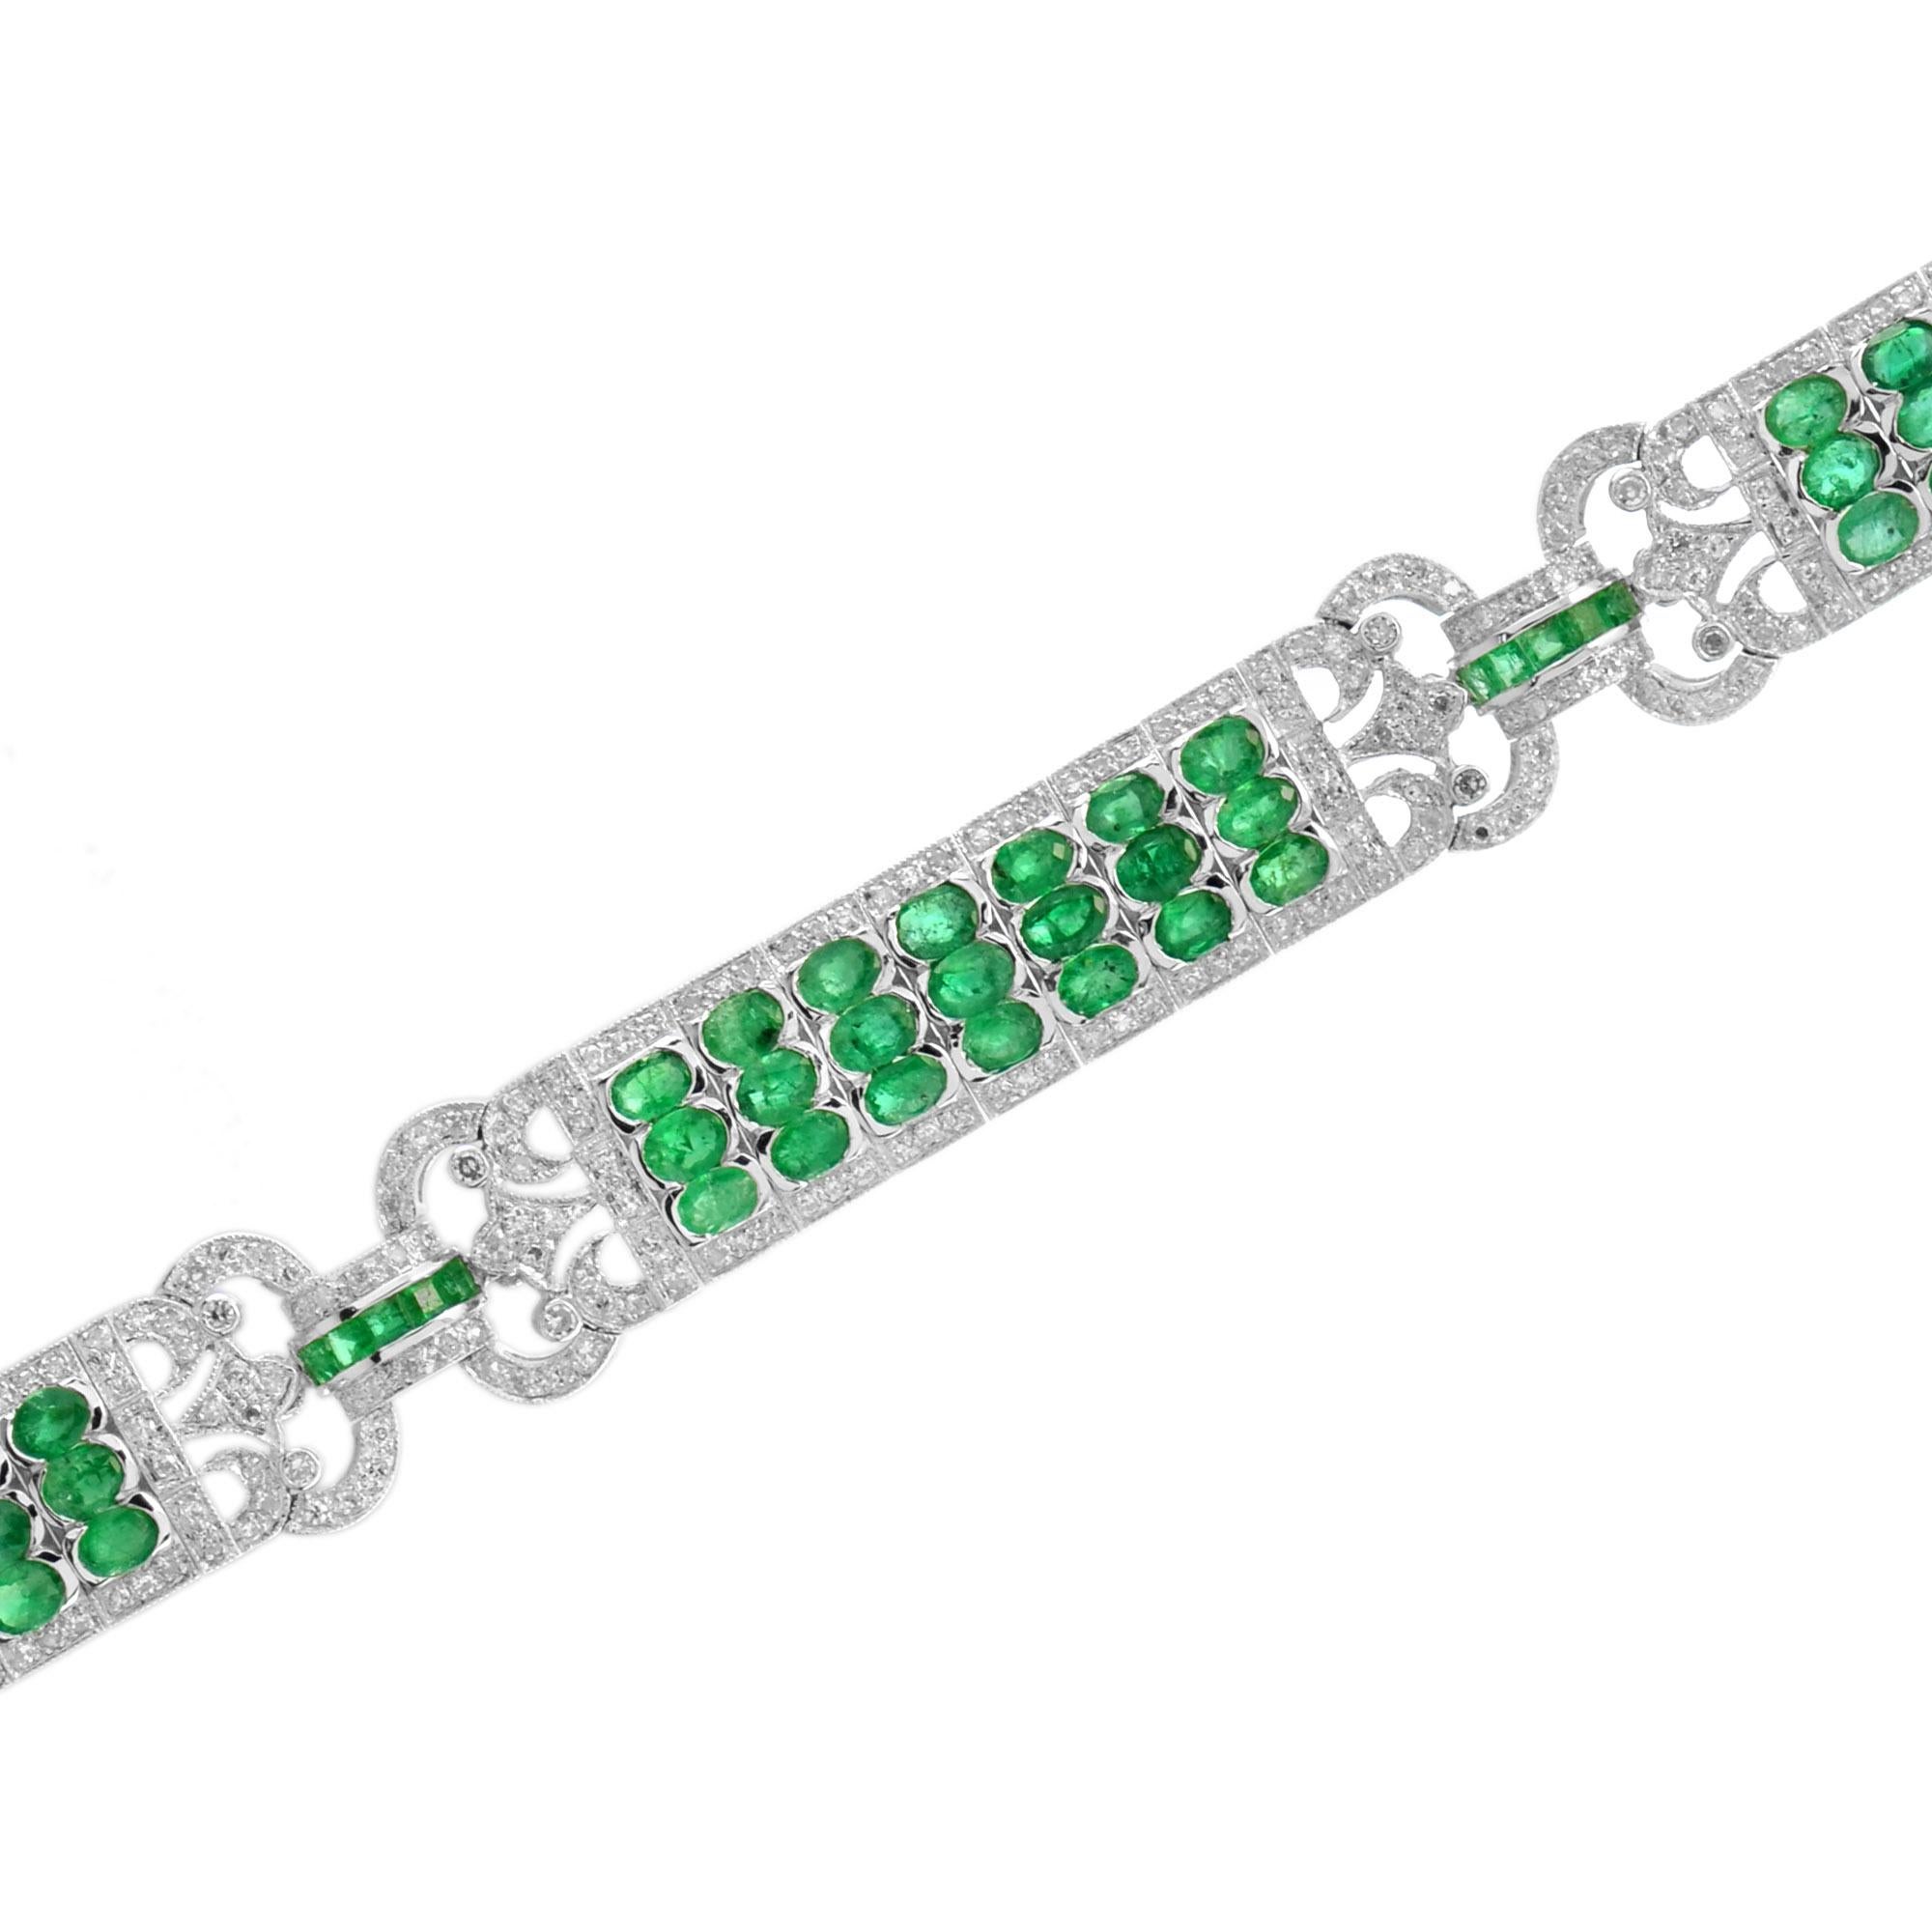 This Art Deco inspired oval and square natural emerald bracelet and diamond in 18k white gold accentuates its unique shapes though shimmering light, paying homage to the past and defining the future simultaneously. The bracelet features 12.89